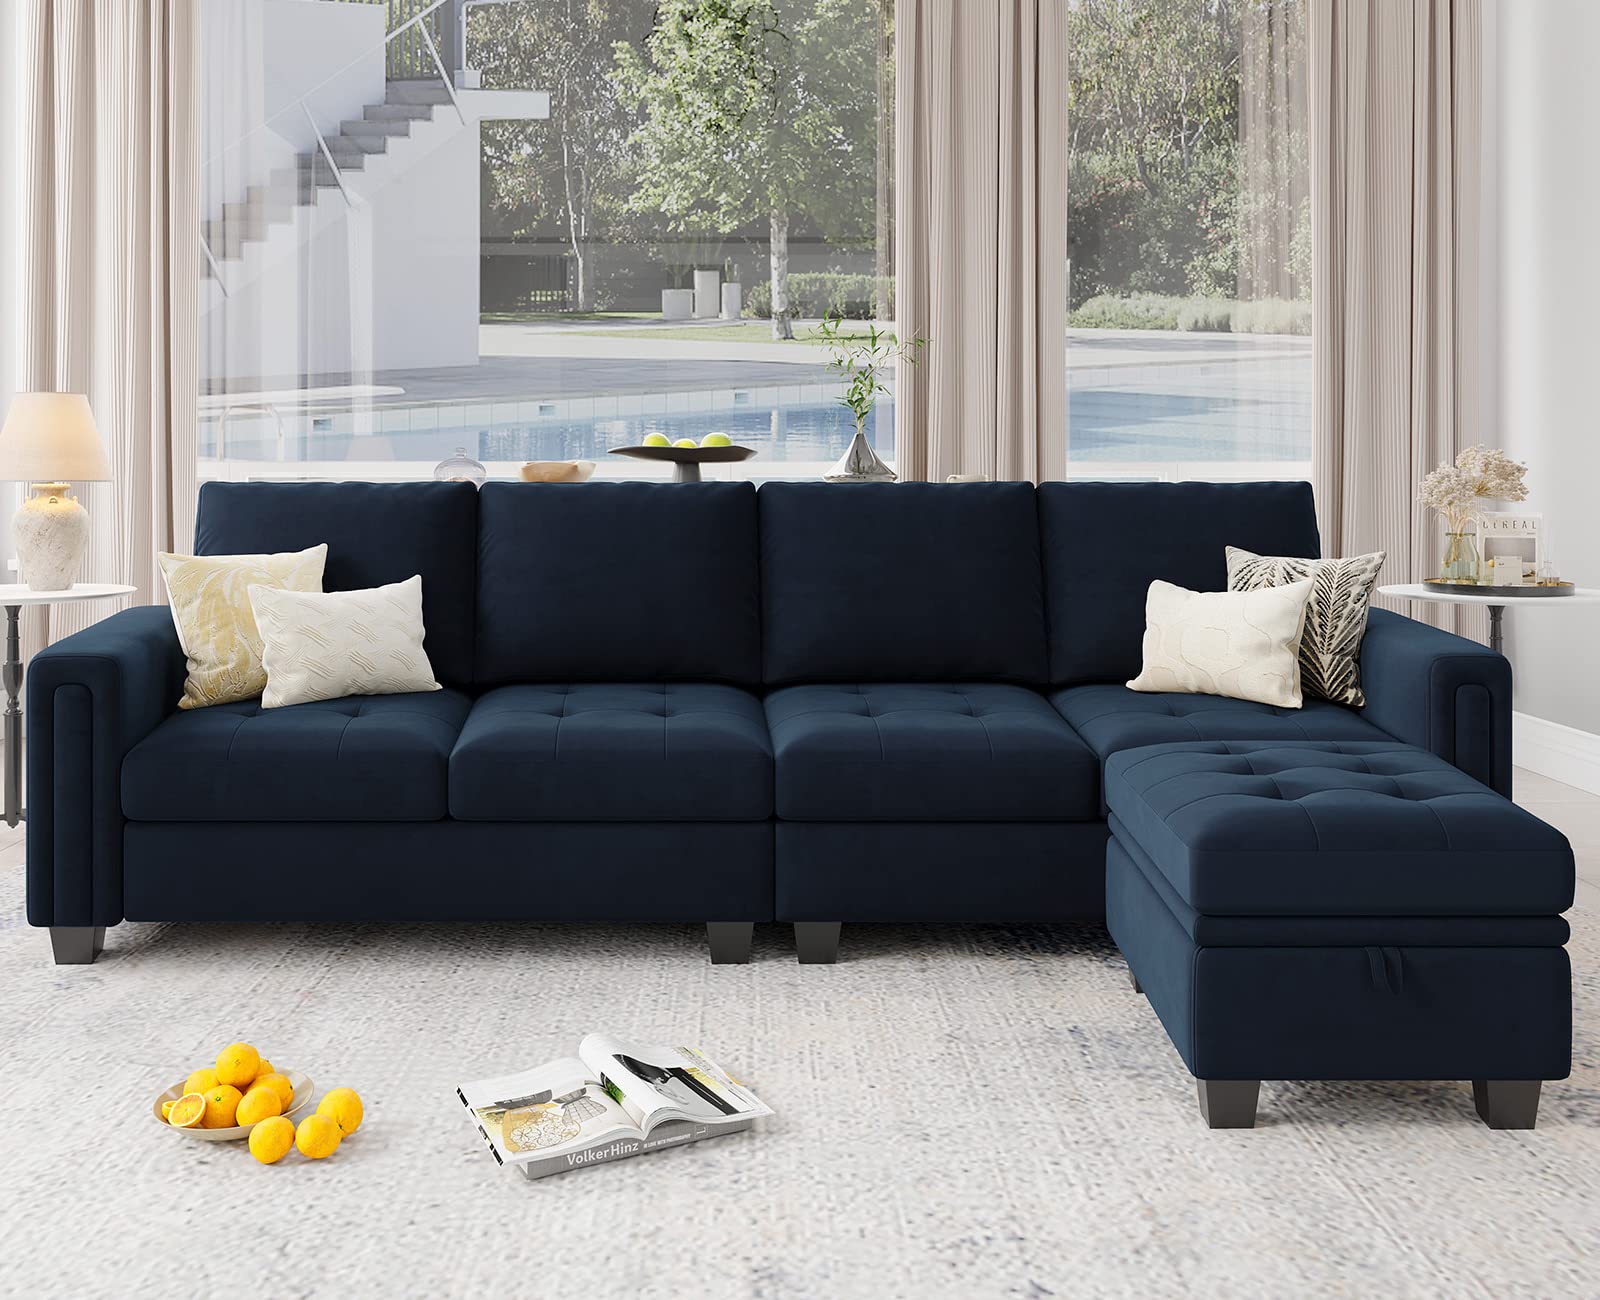 Belffin Velvet Reversible Sectional Sofa with Chasie Convertible Sectional Couch with Storage Ottoman L Shaped 4-seat Sectional 